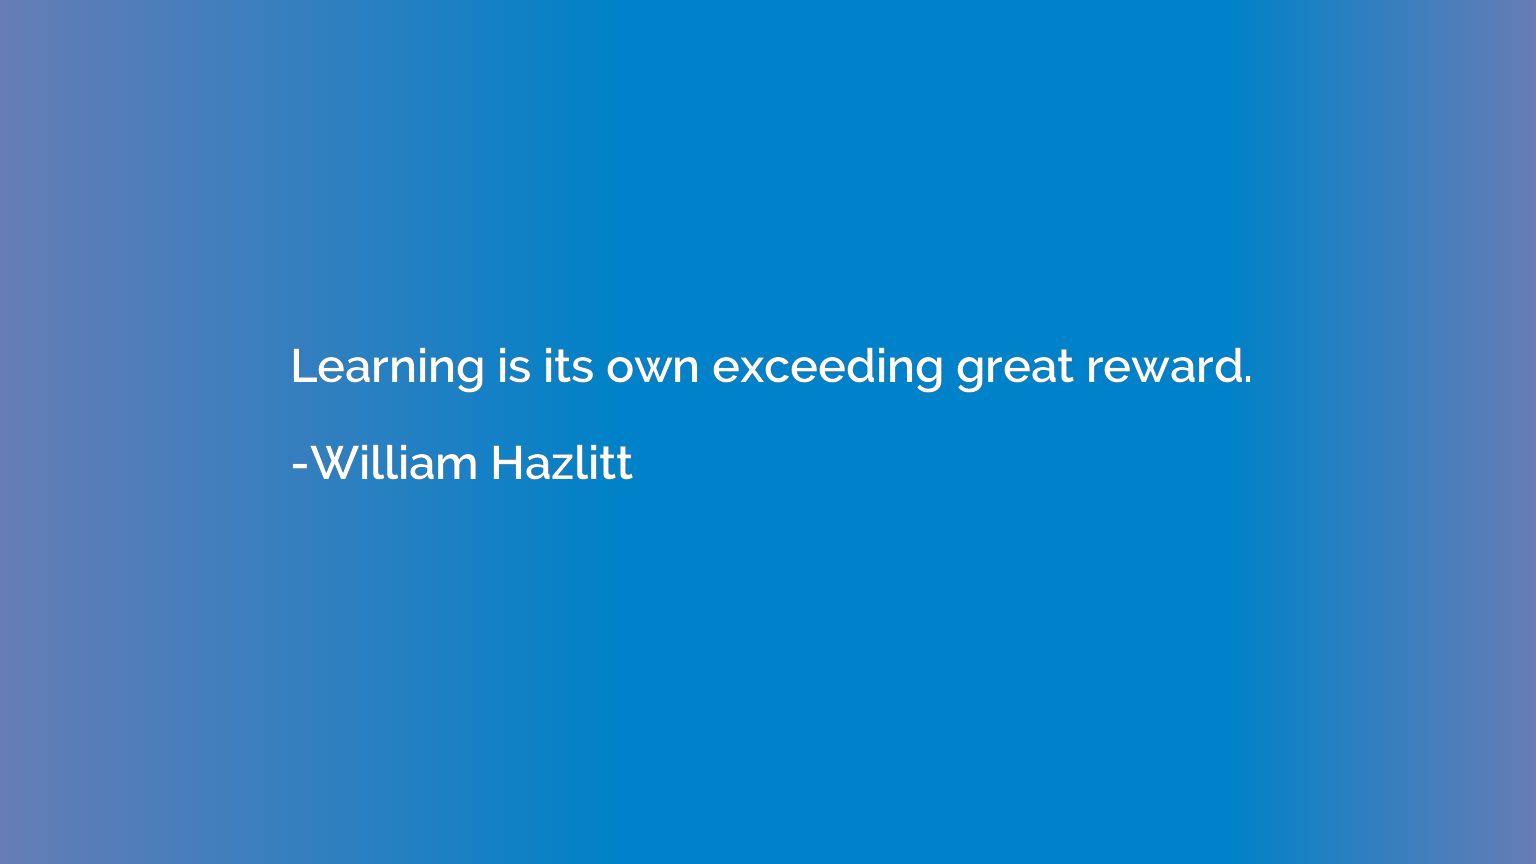 Learning is its own exceeding great reward.